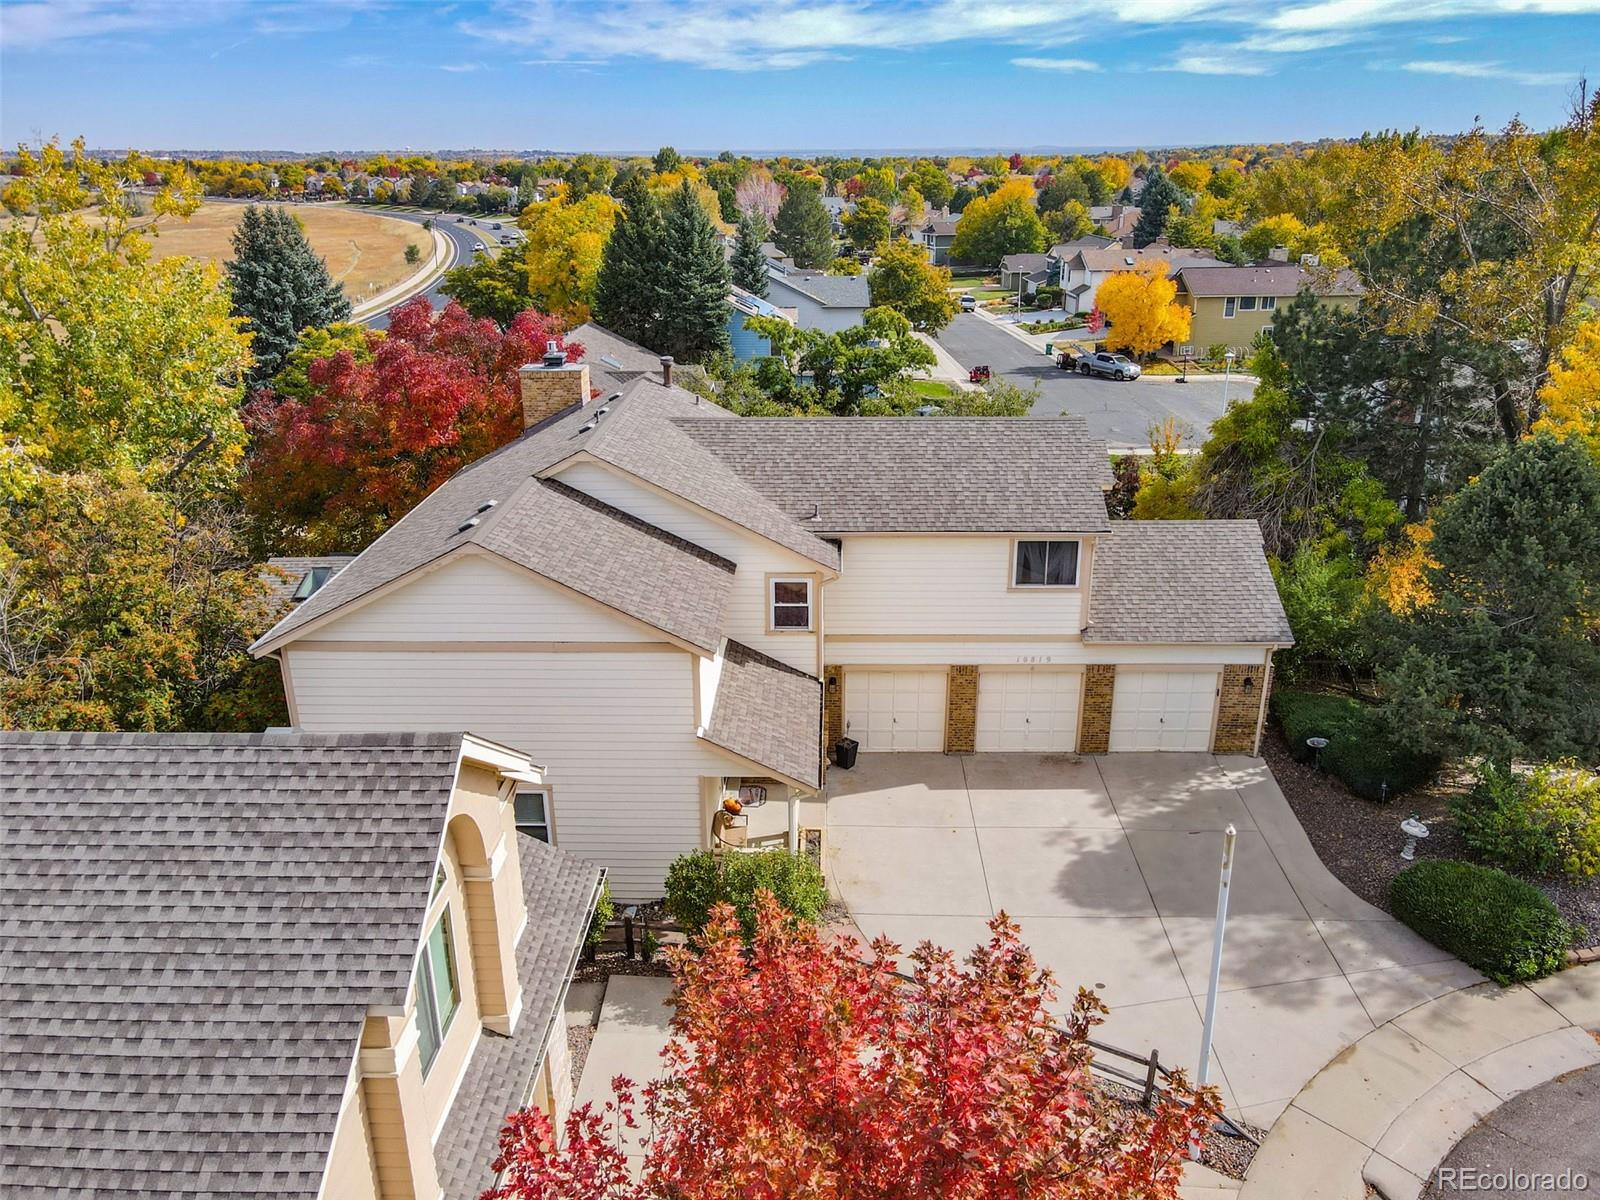 Report Image for 10819 W 85th Place,Arvada, Colorado